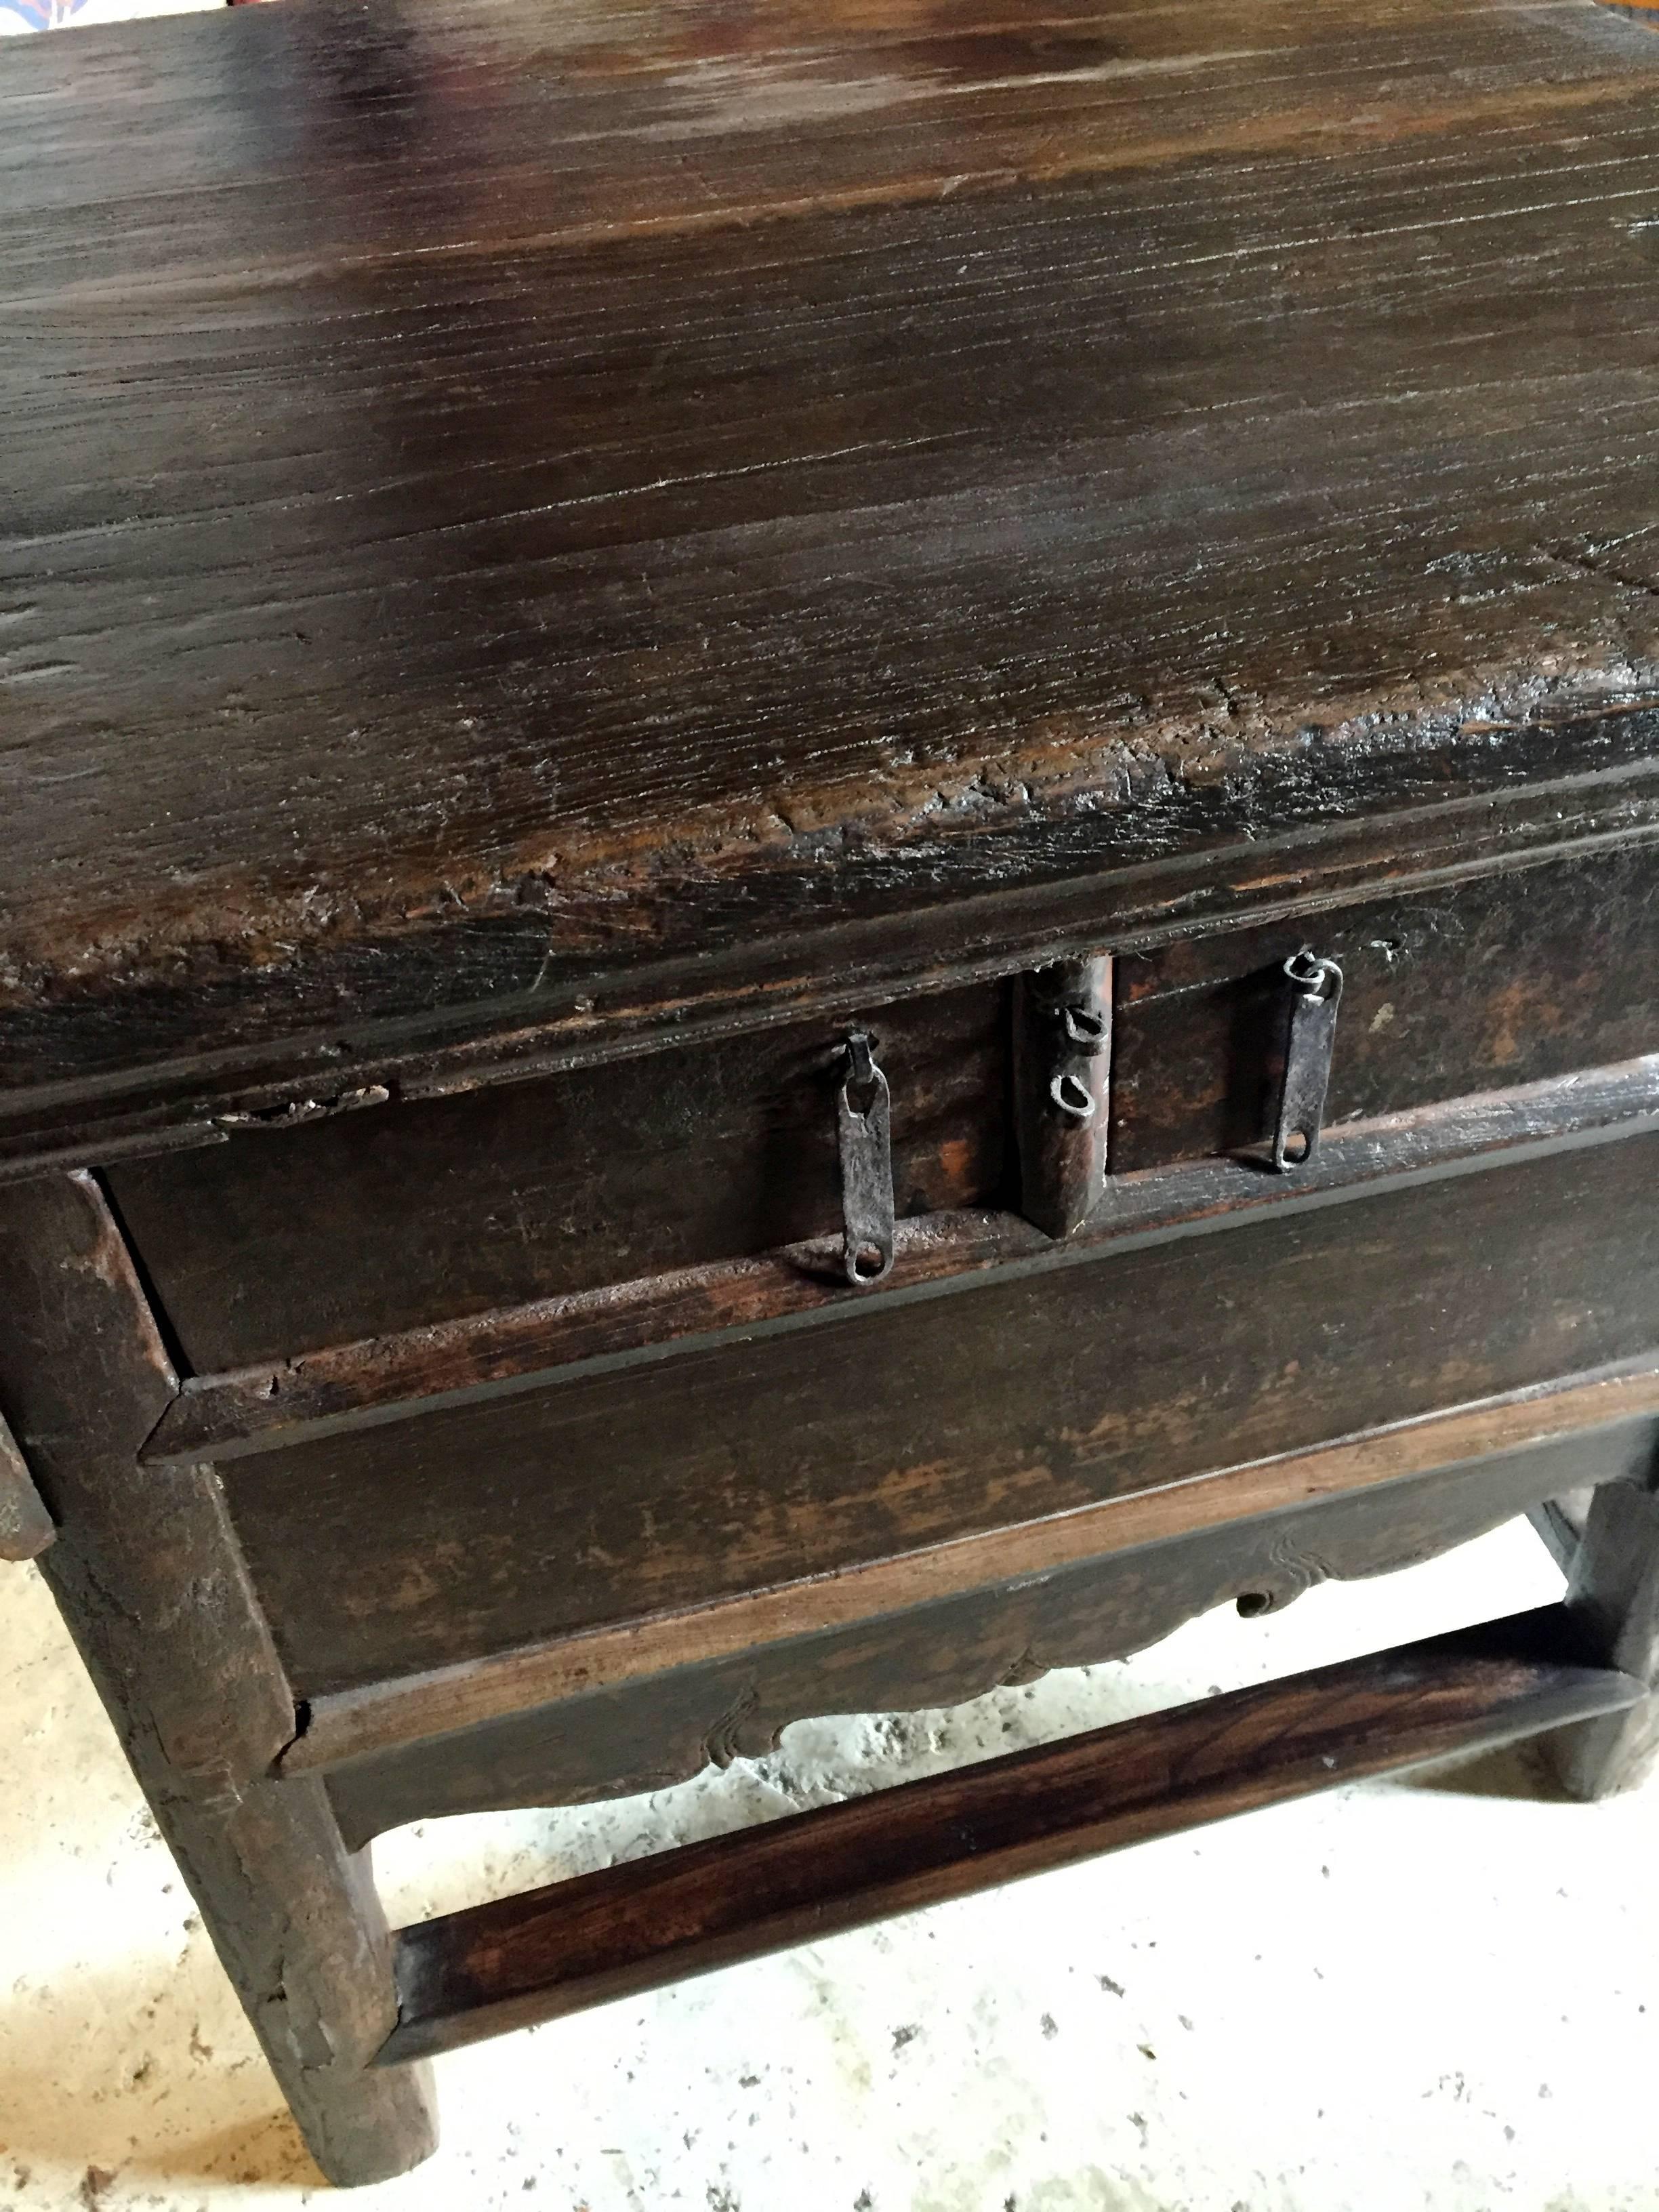 This is a very special, all original country table. The top is almost a square, made with a chunk of solid wood. The table is very heavy and substantial as only solid woods and used.

Two full length drawers provide ample storage and hide a secret